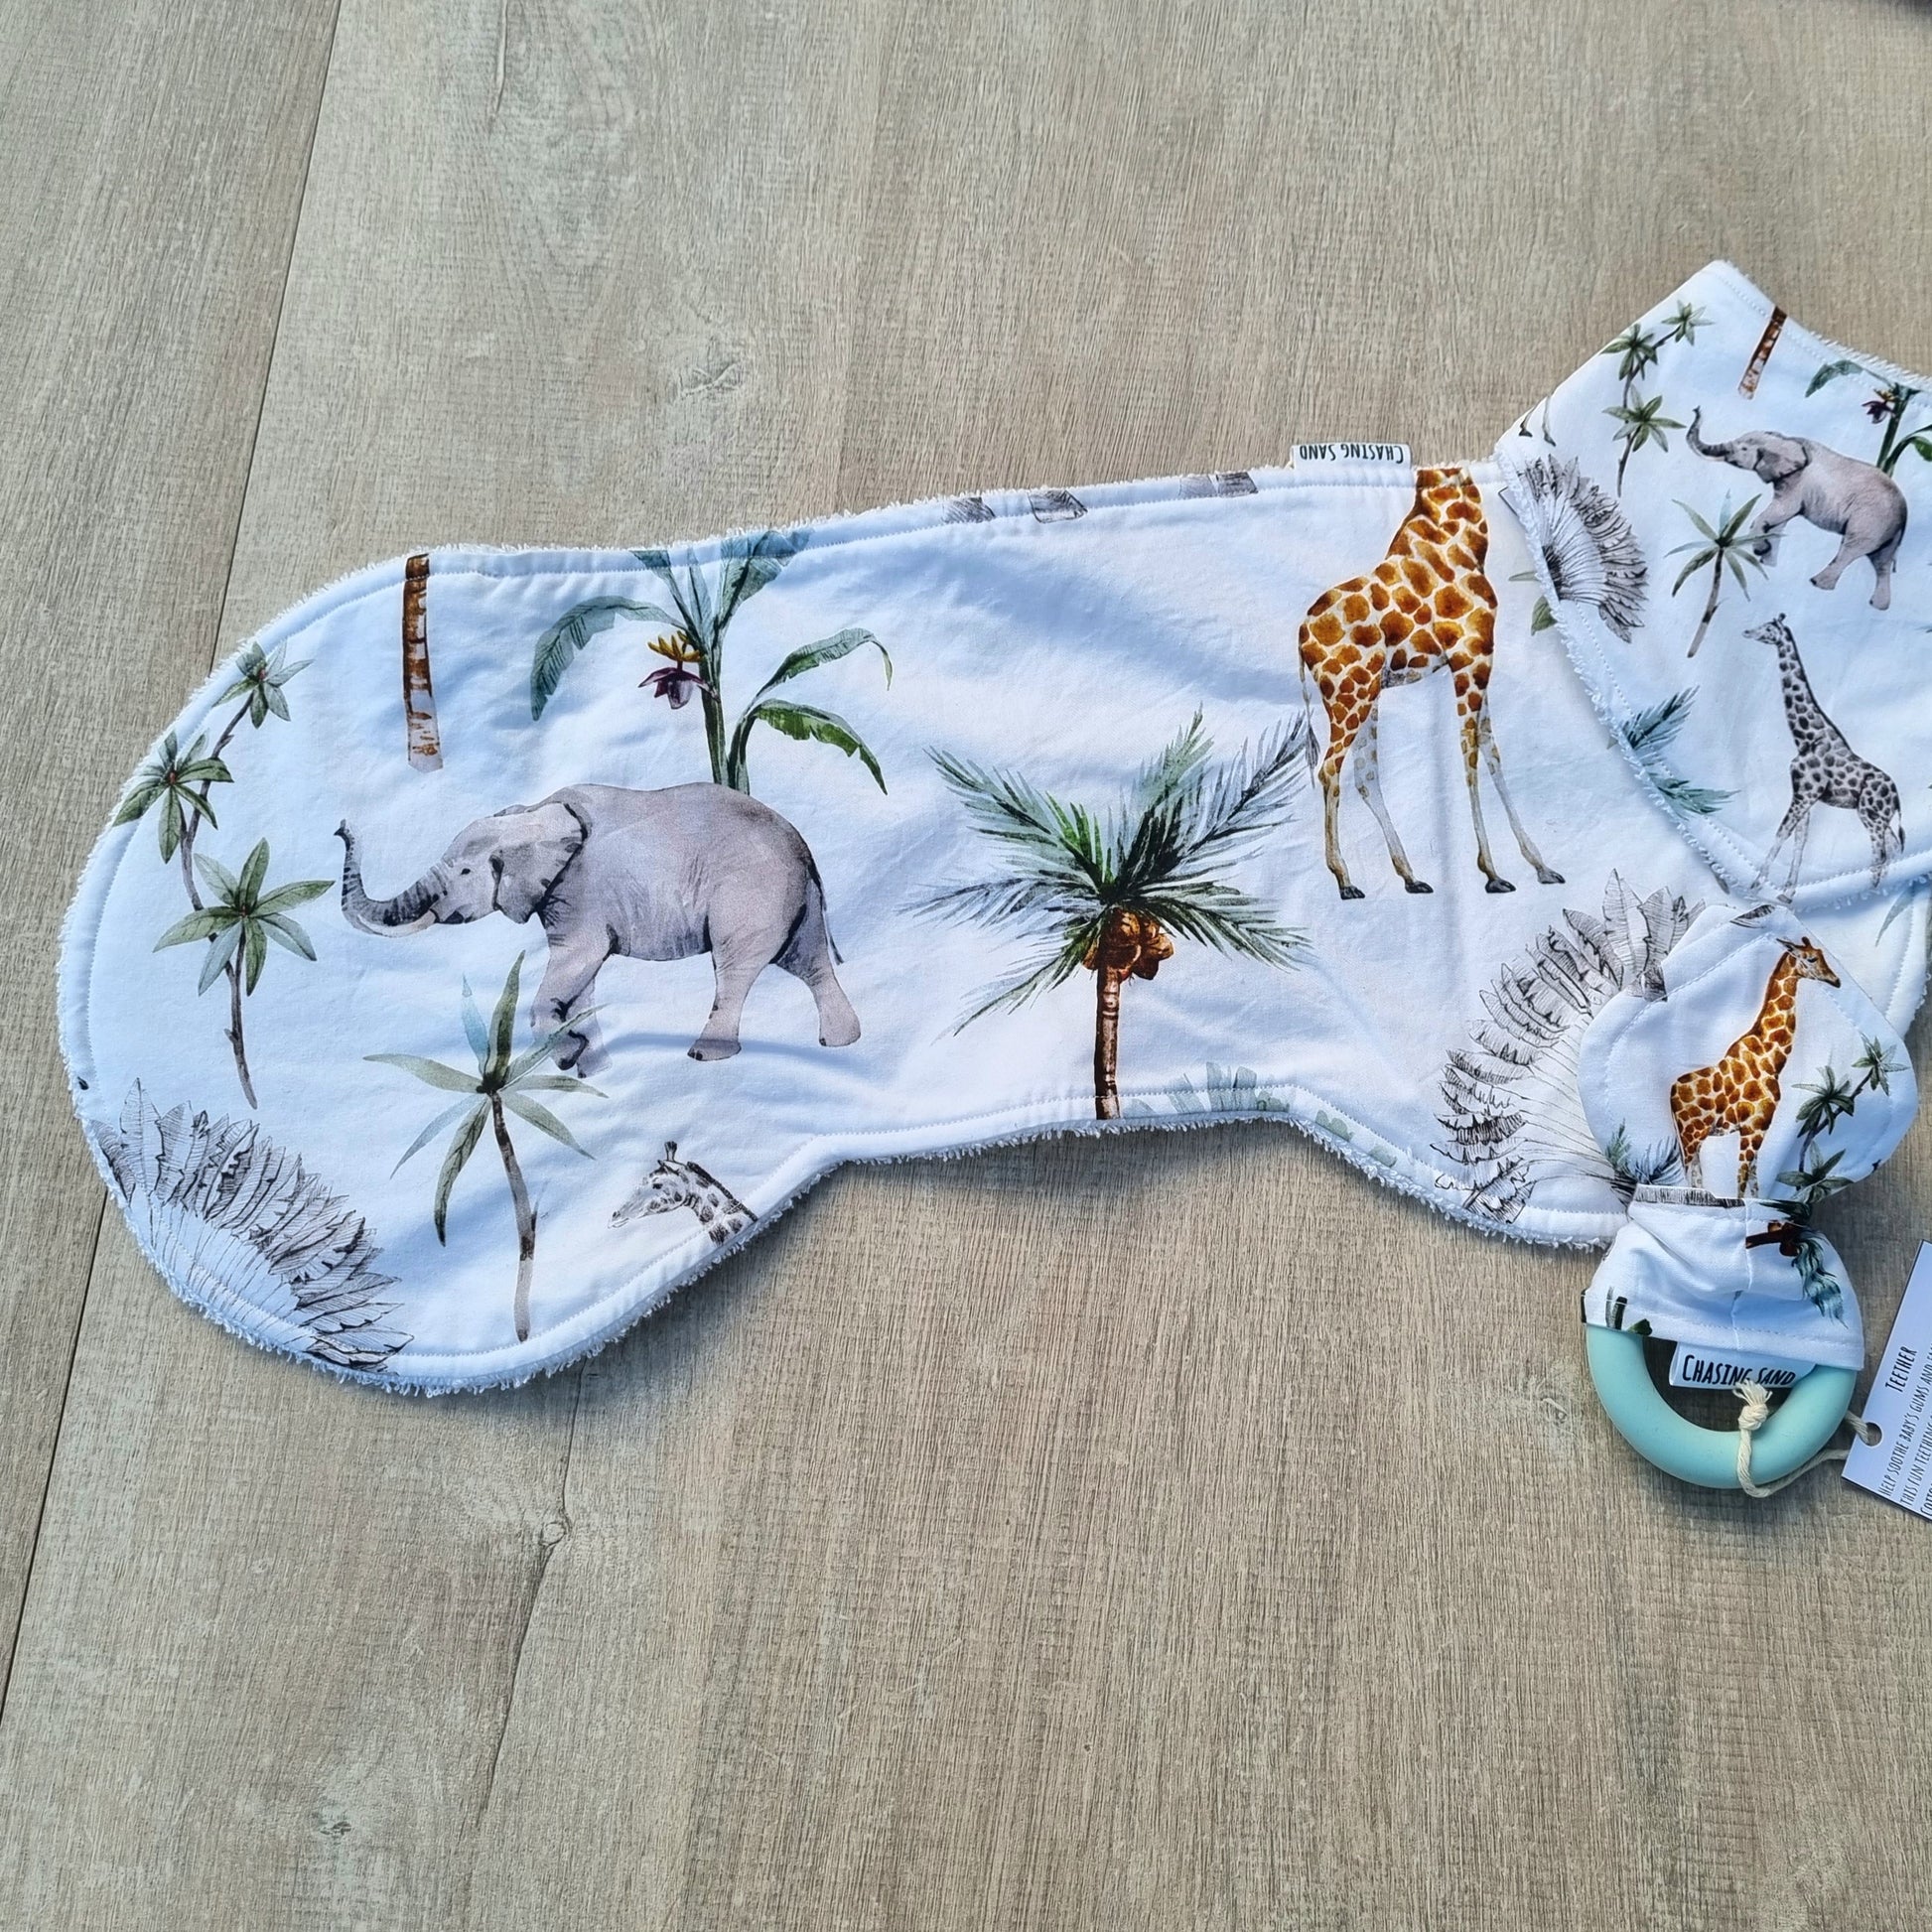 Burp Cloth - Safari against wooden backdrop. African animal and plant illustrations against white background.